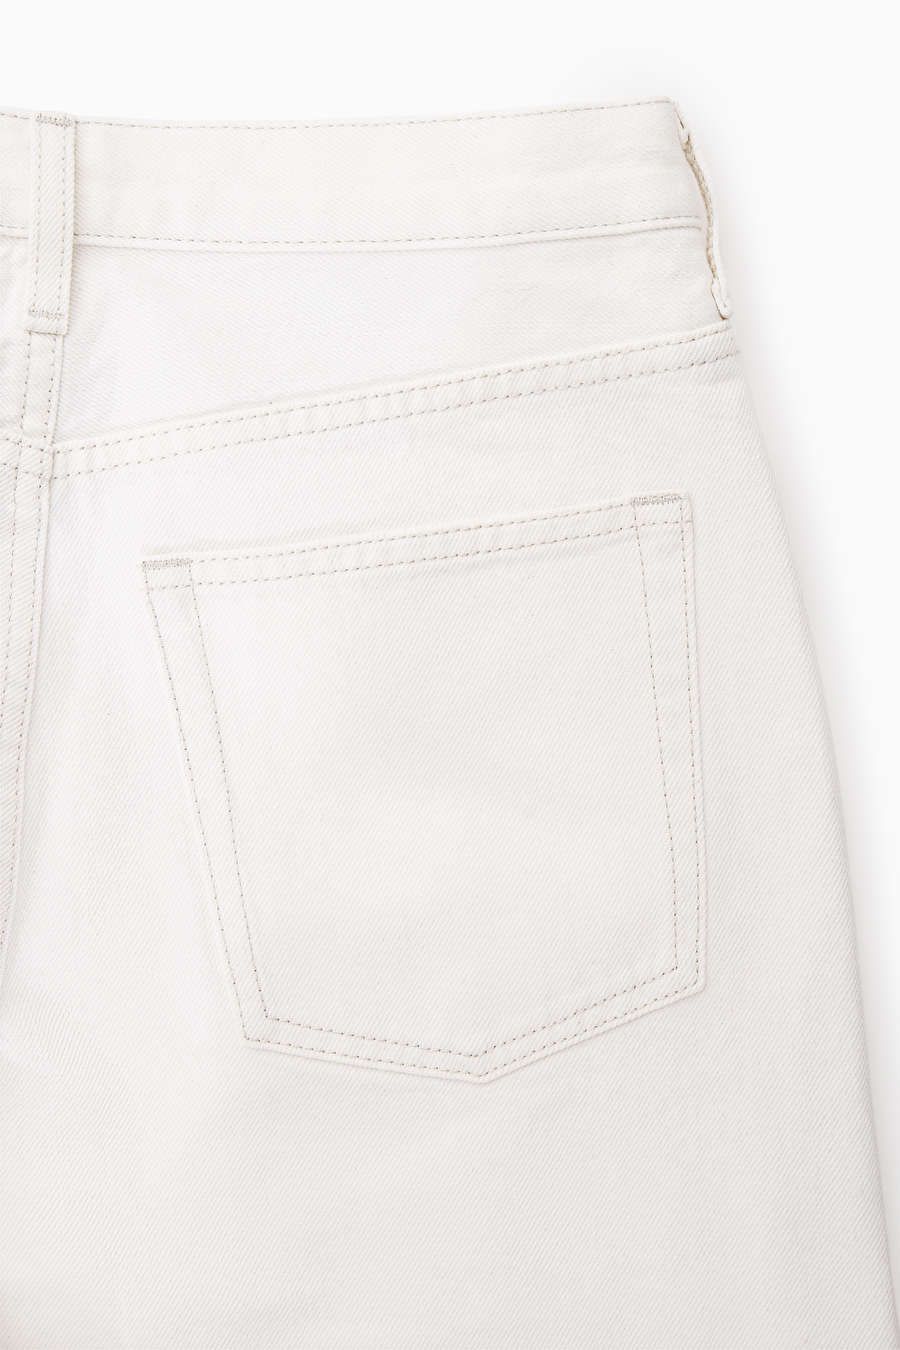 ARCH JEANS - TAPERED | COS UK